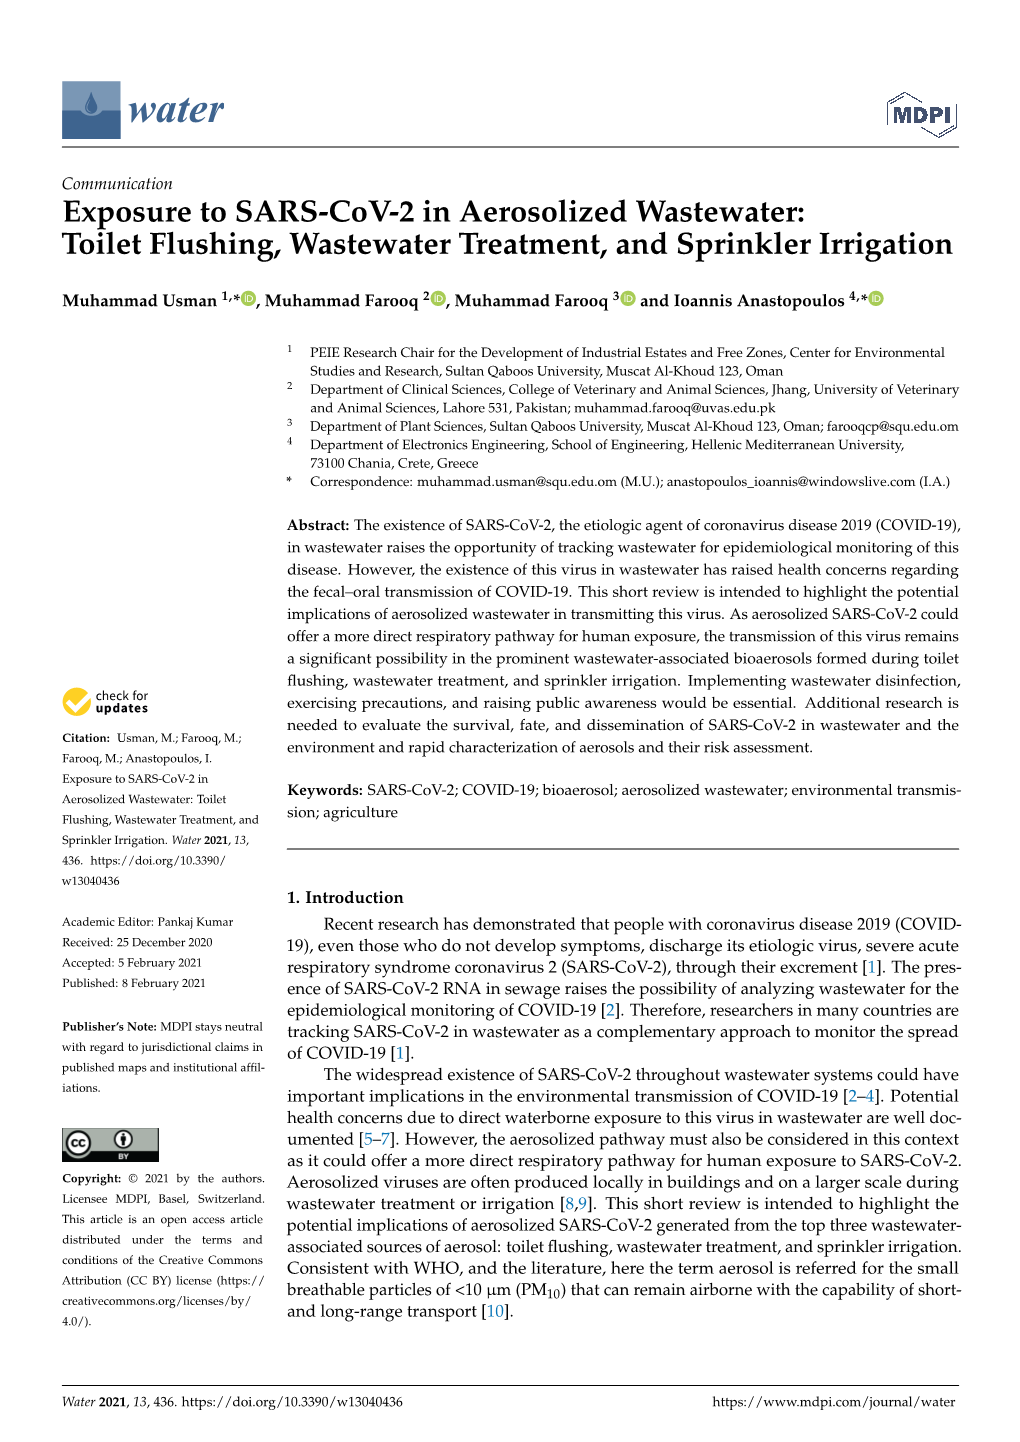 Exposure to SARS-Cov-2 in Aerosolized Wastewater: Toilet Flushing, Wastewater Treatment, and Sprinkler Irrigation